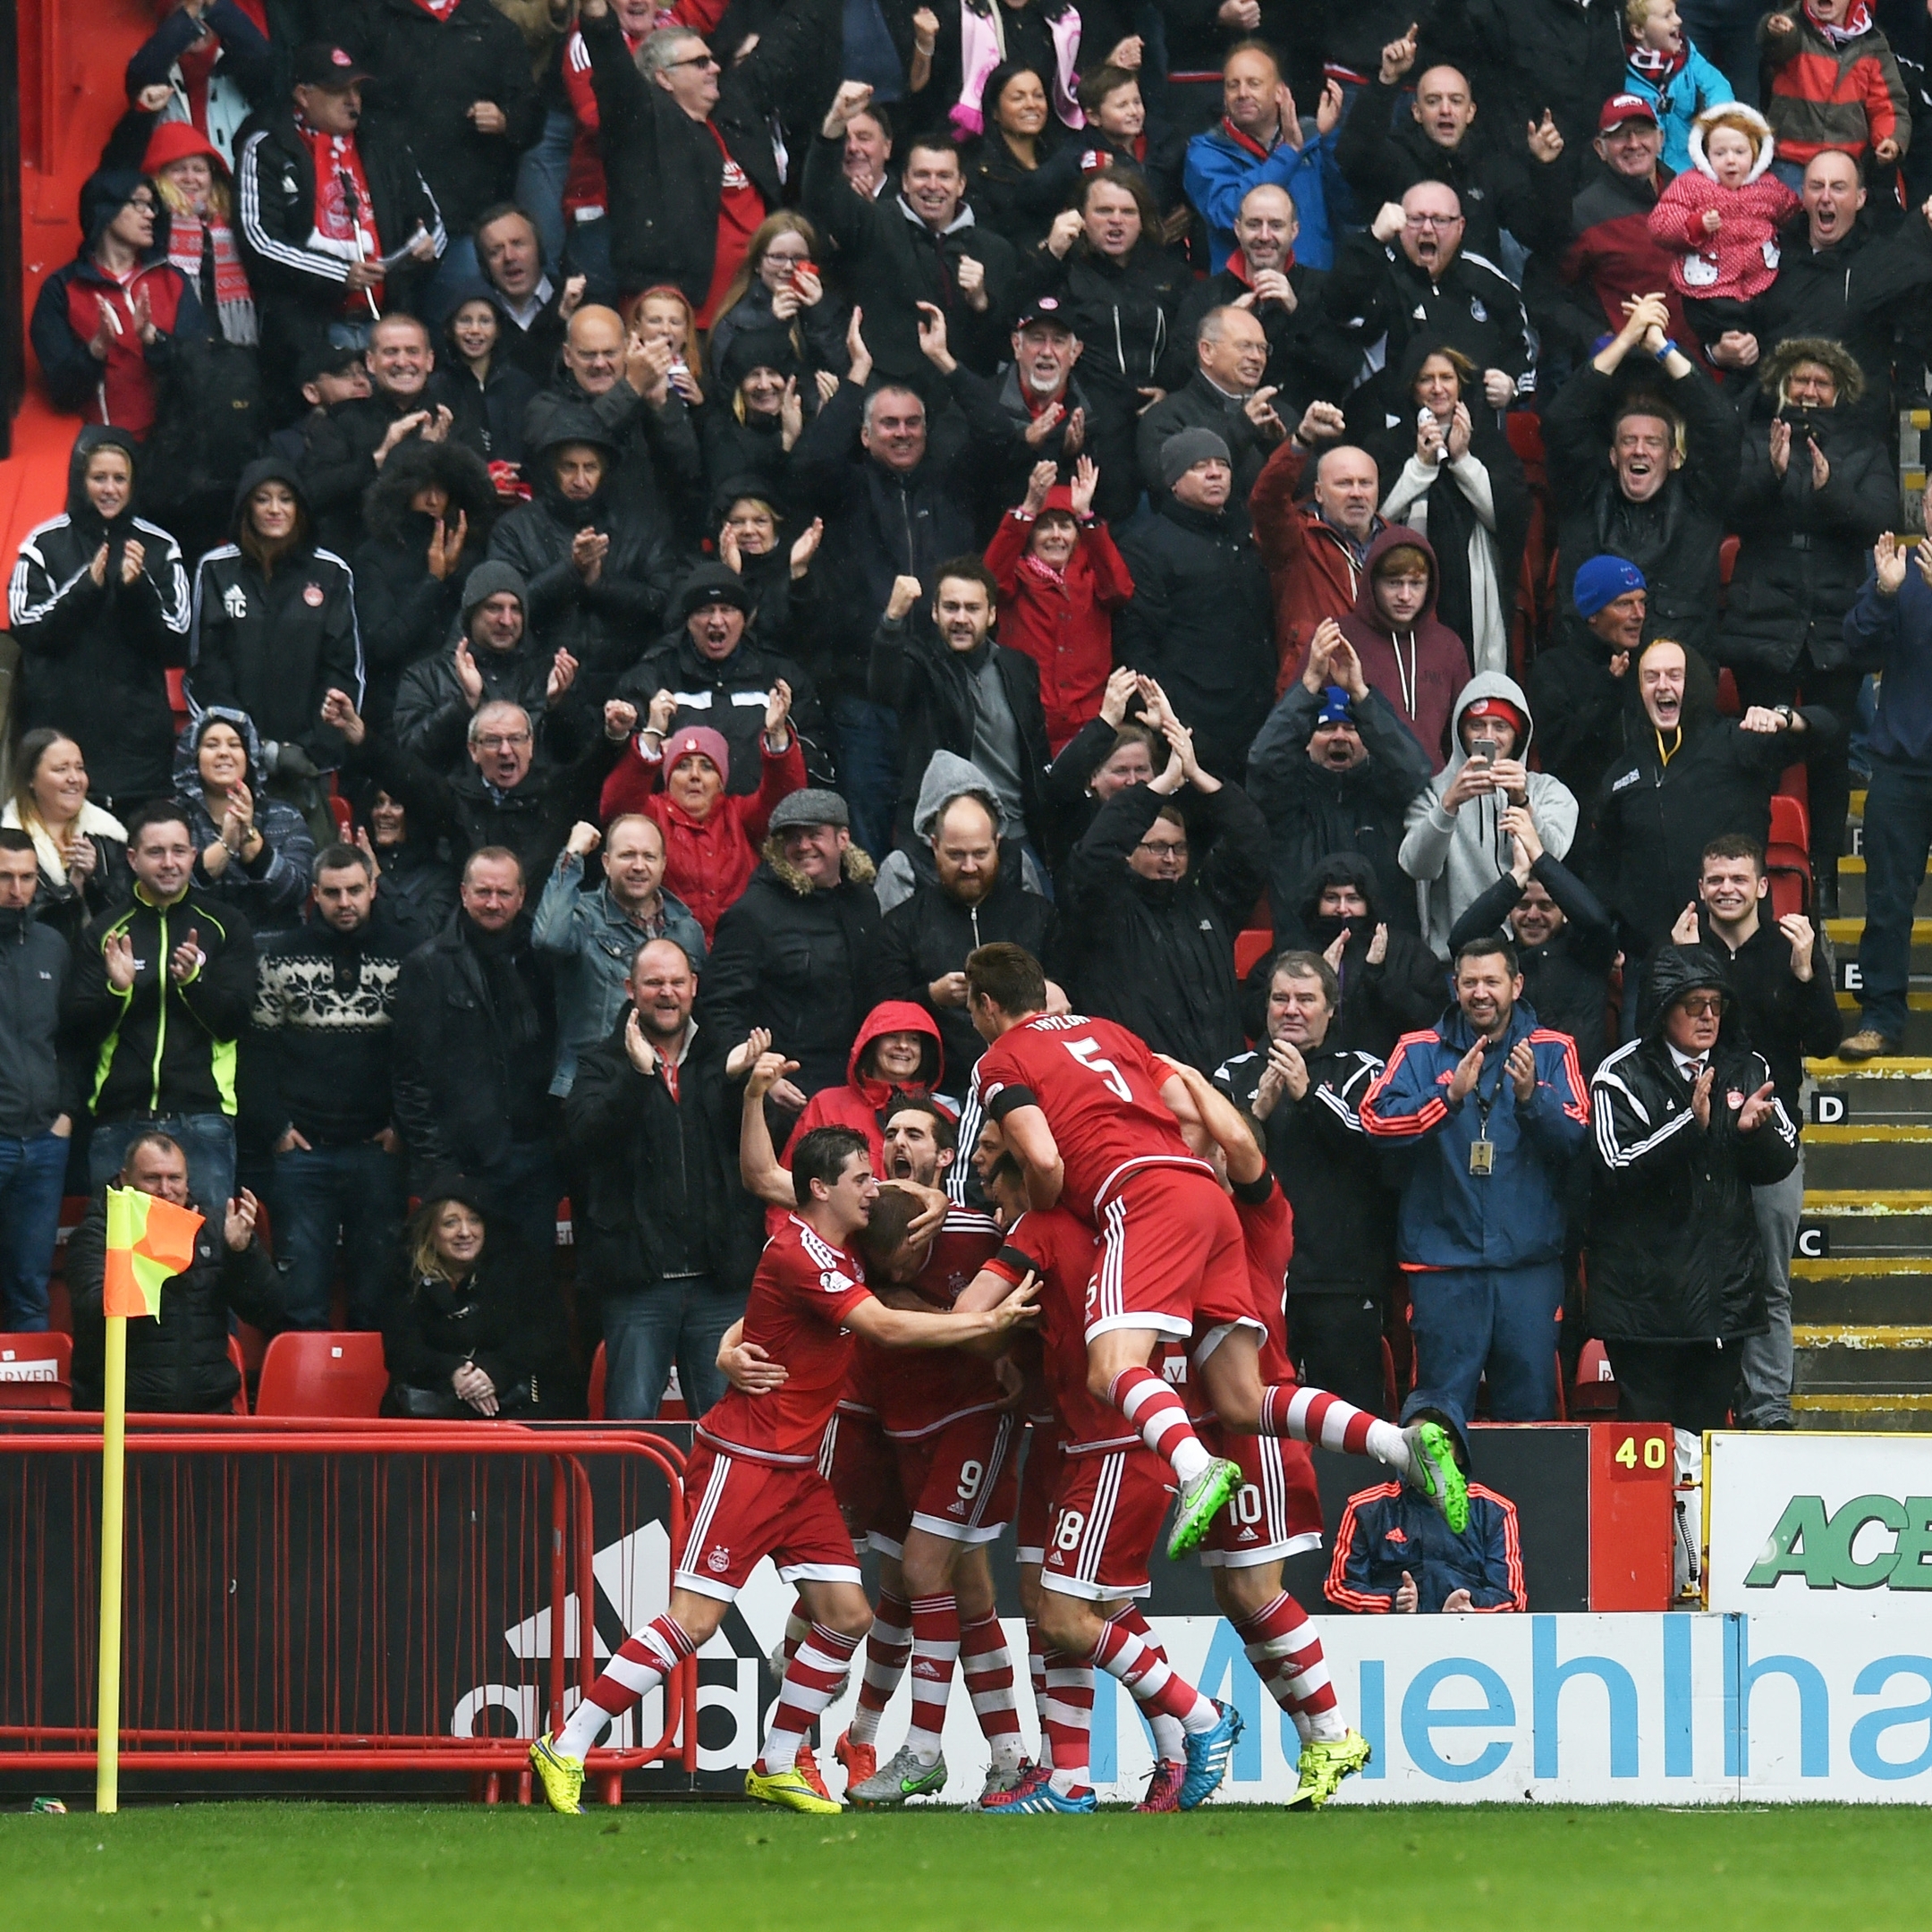 The Aberdeen players celebrate Rooney's equalising goal in front of the Dons fans